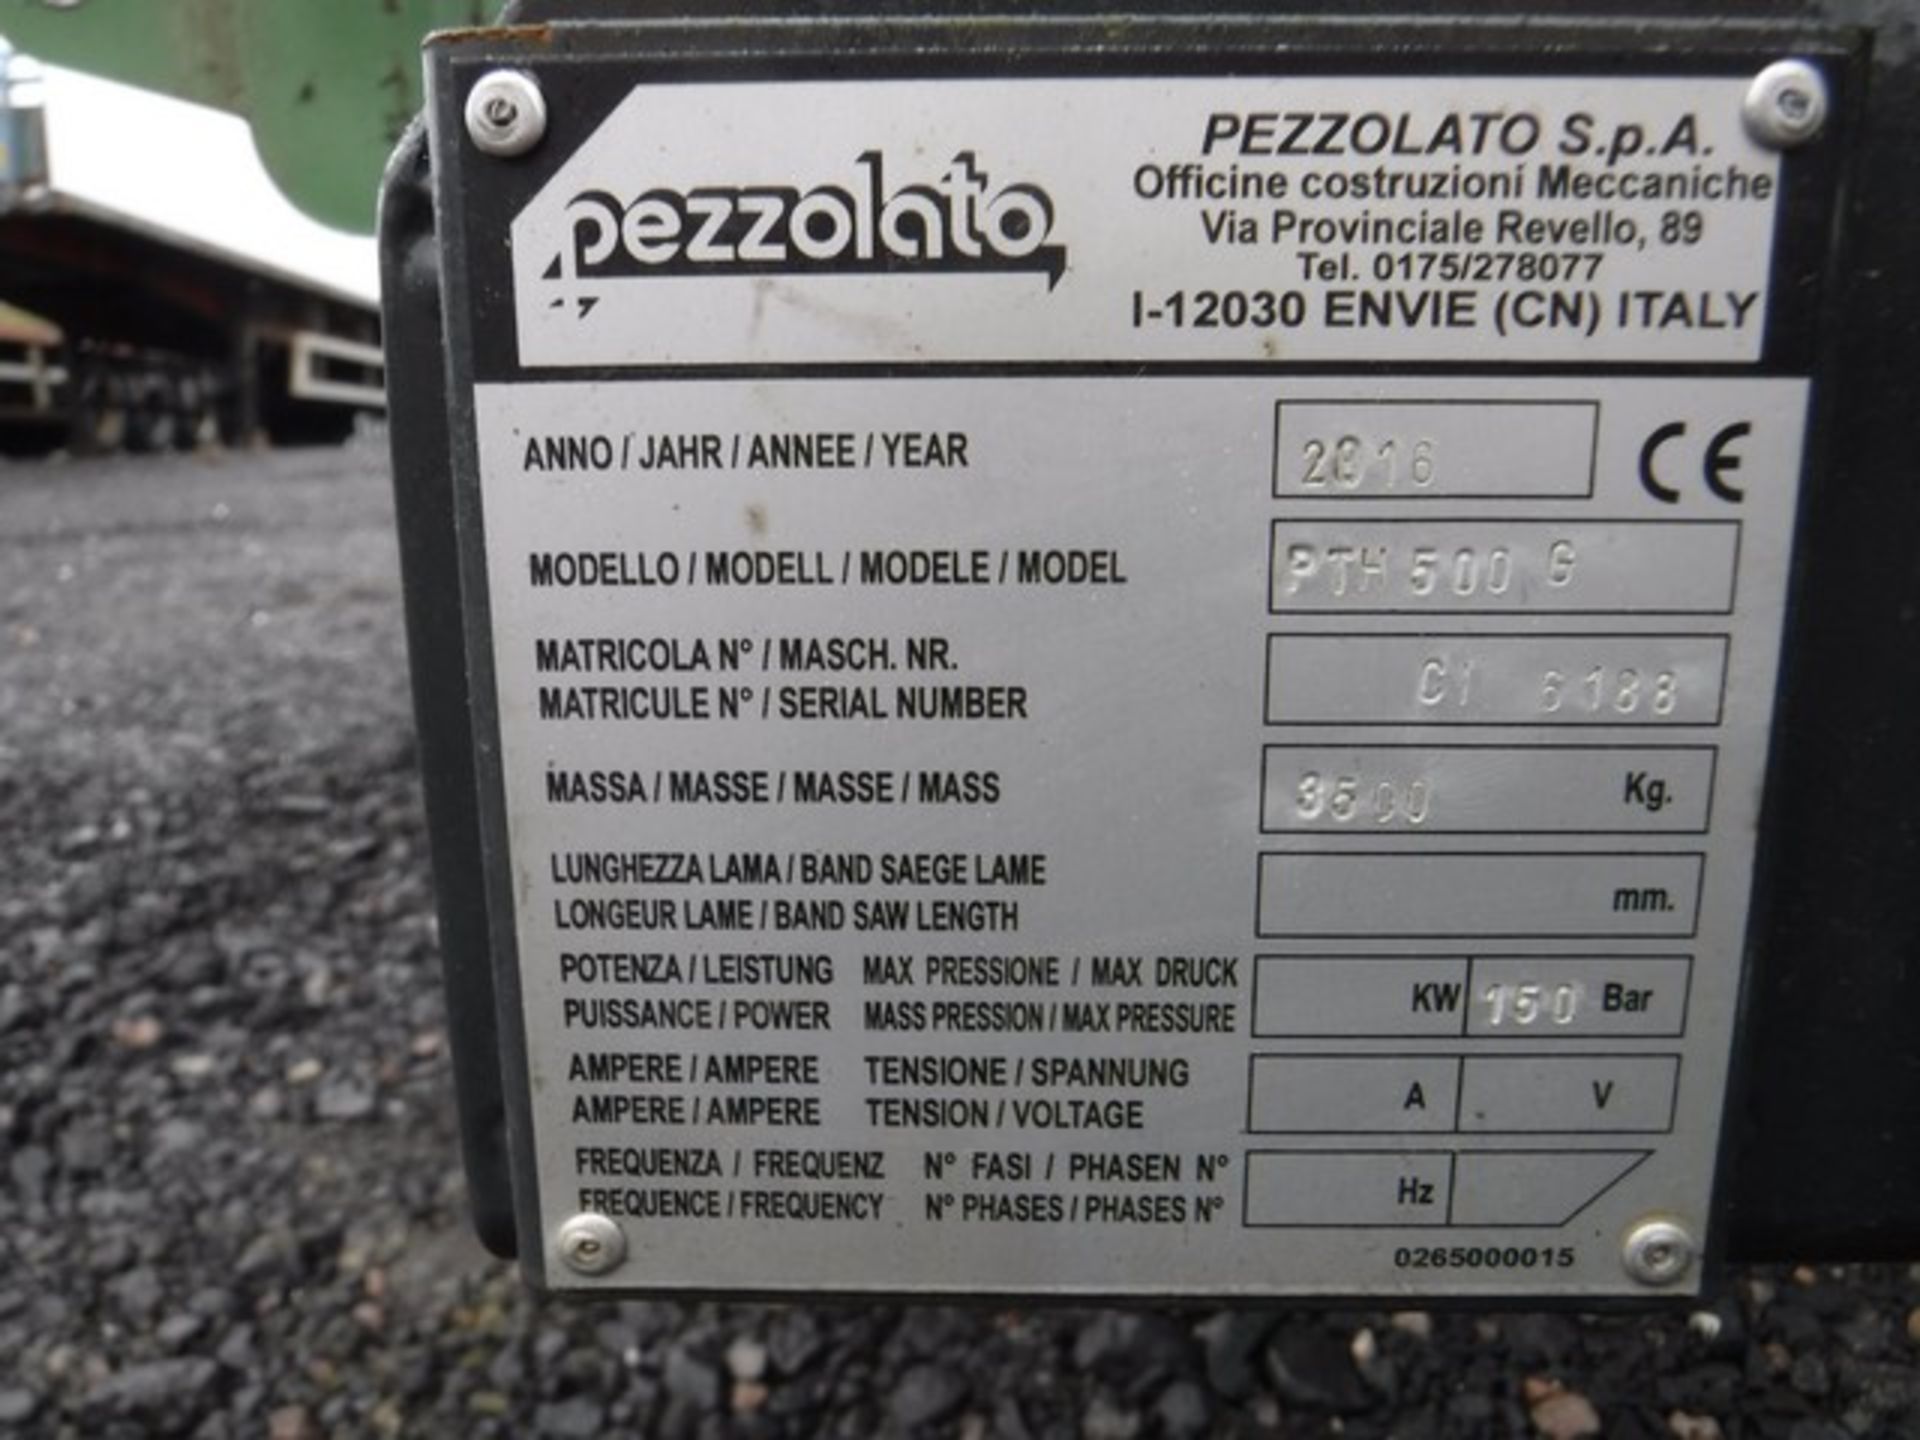 2016 PEZZOLATO PTH 500 WOOD CHIPPER WITH LOADING CONVEYOR BELT, S/N C16188, DETAILS OF REMOTE ETC IN - Image 3 of 11